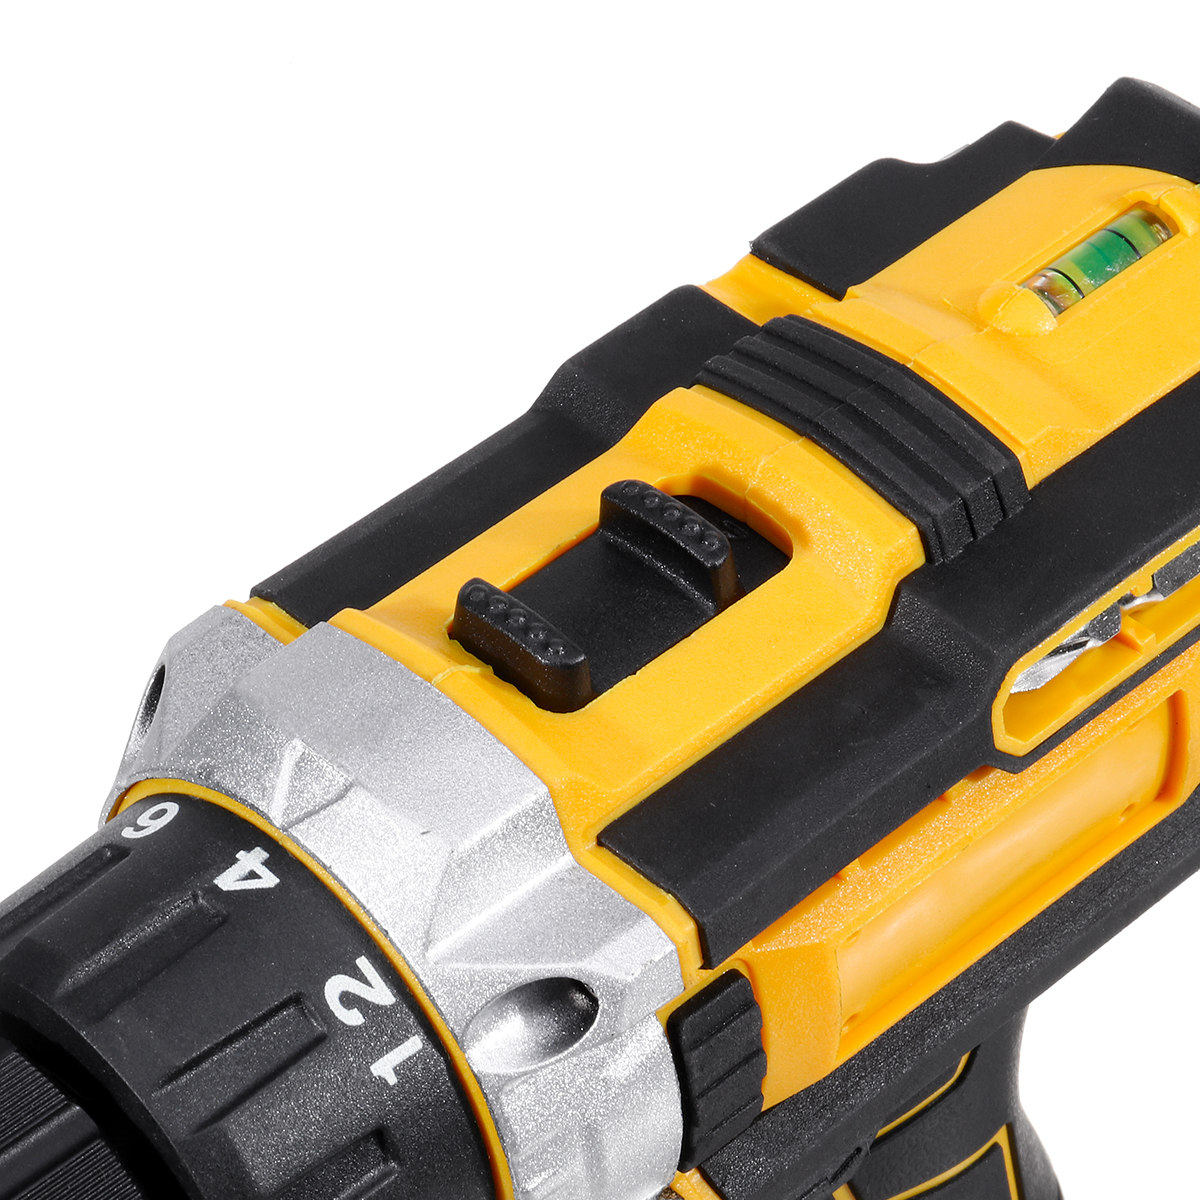 2000rpm-38Nm-21V-Lithium-Electric-Impact-Hammer-Drill-Wood-Drilling-Screwdrivers-with-Battery-1943471-16